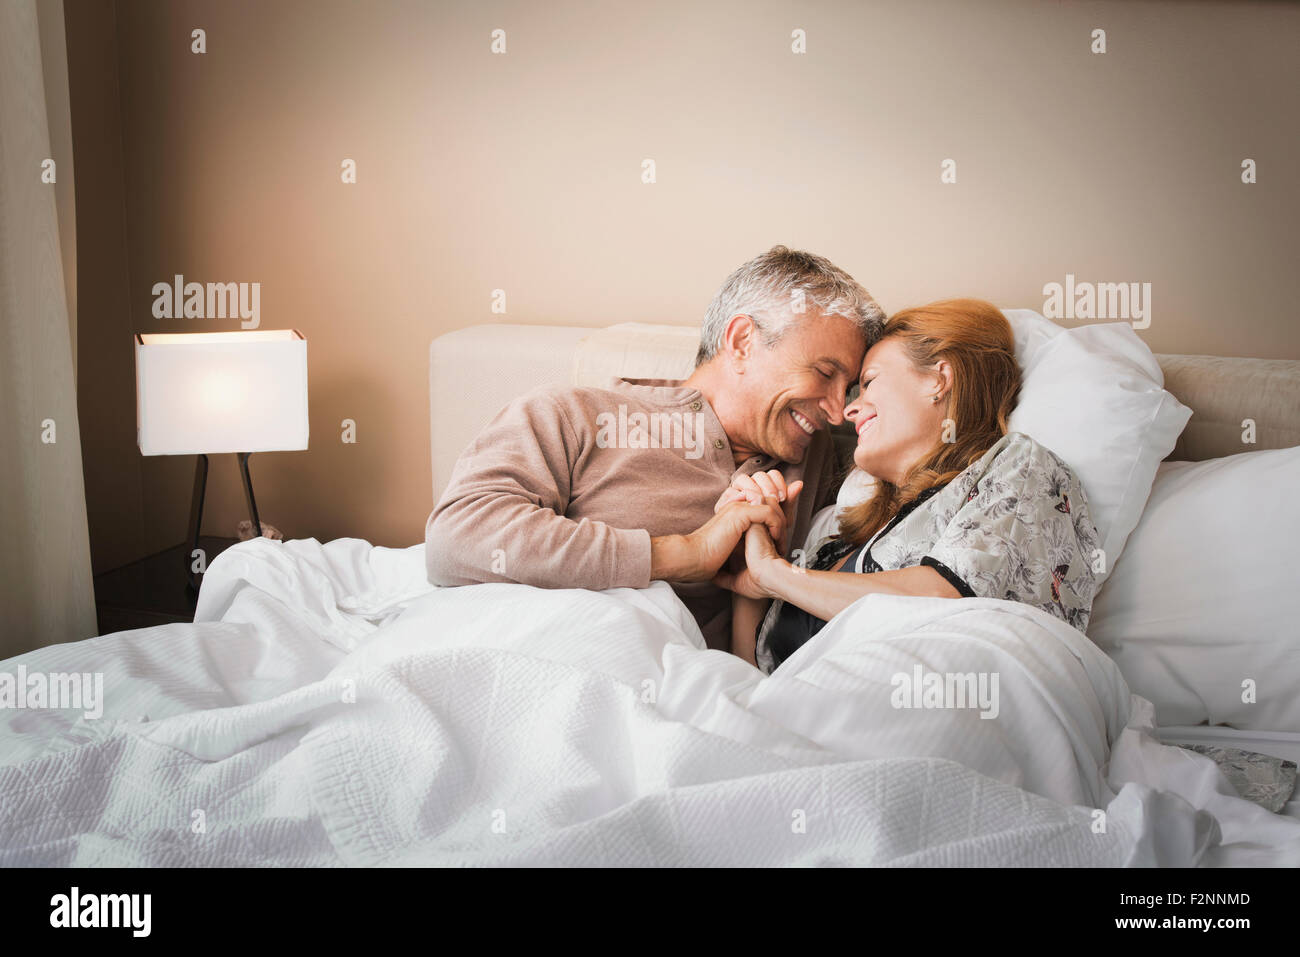 Smiling couple holding hands on bed Banque D'Images